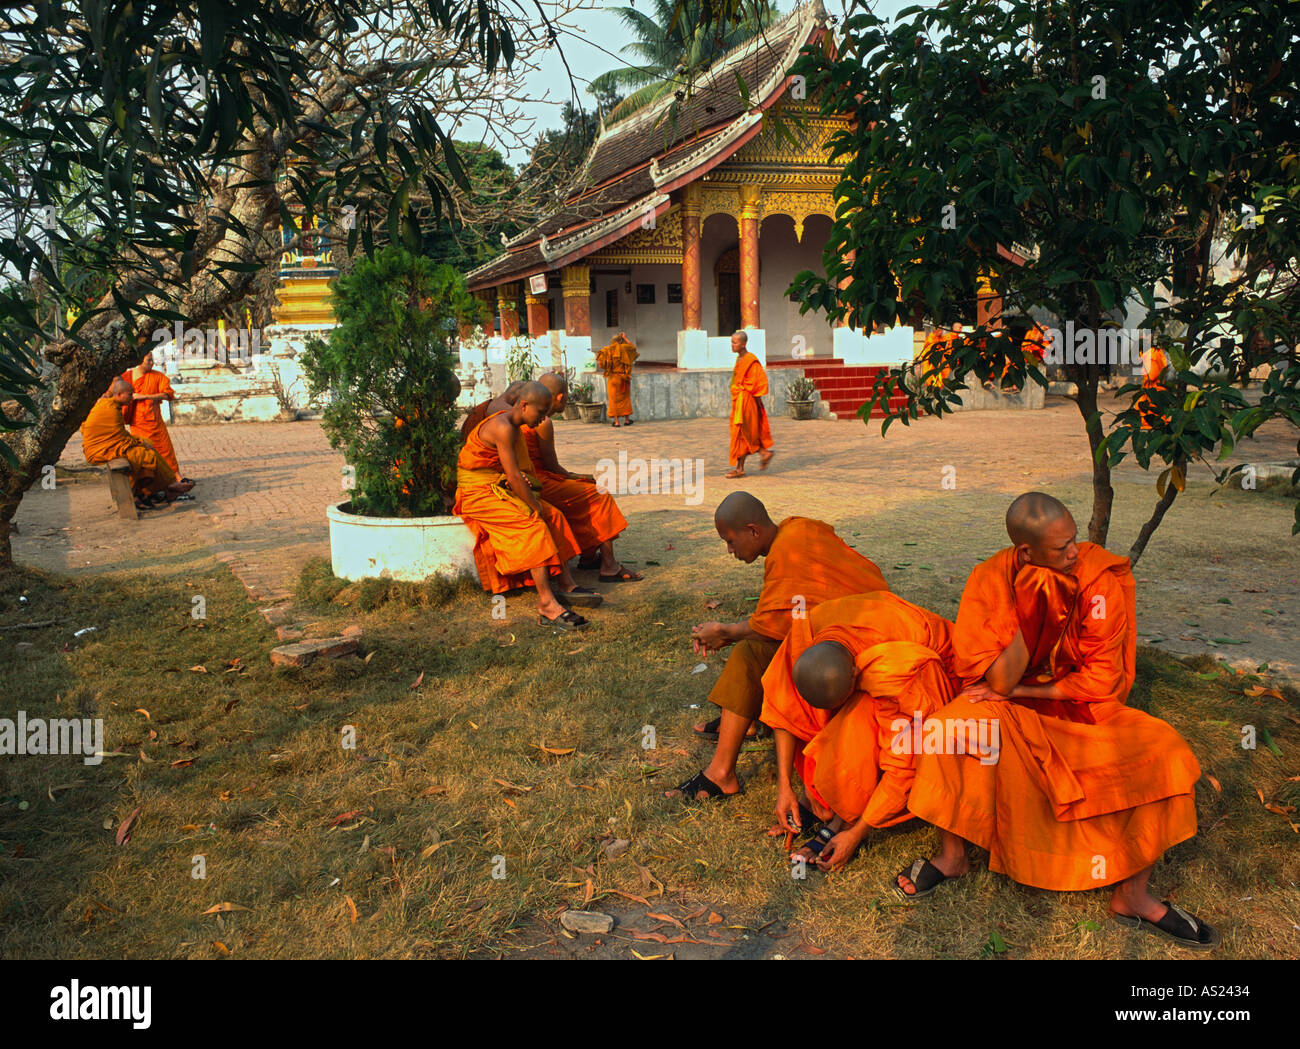 Laos Luang Prabang Temple wat Saen young monks seating in courtyard with temple in bkgd Stock Photo